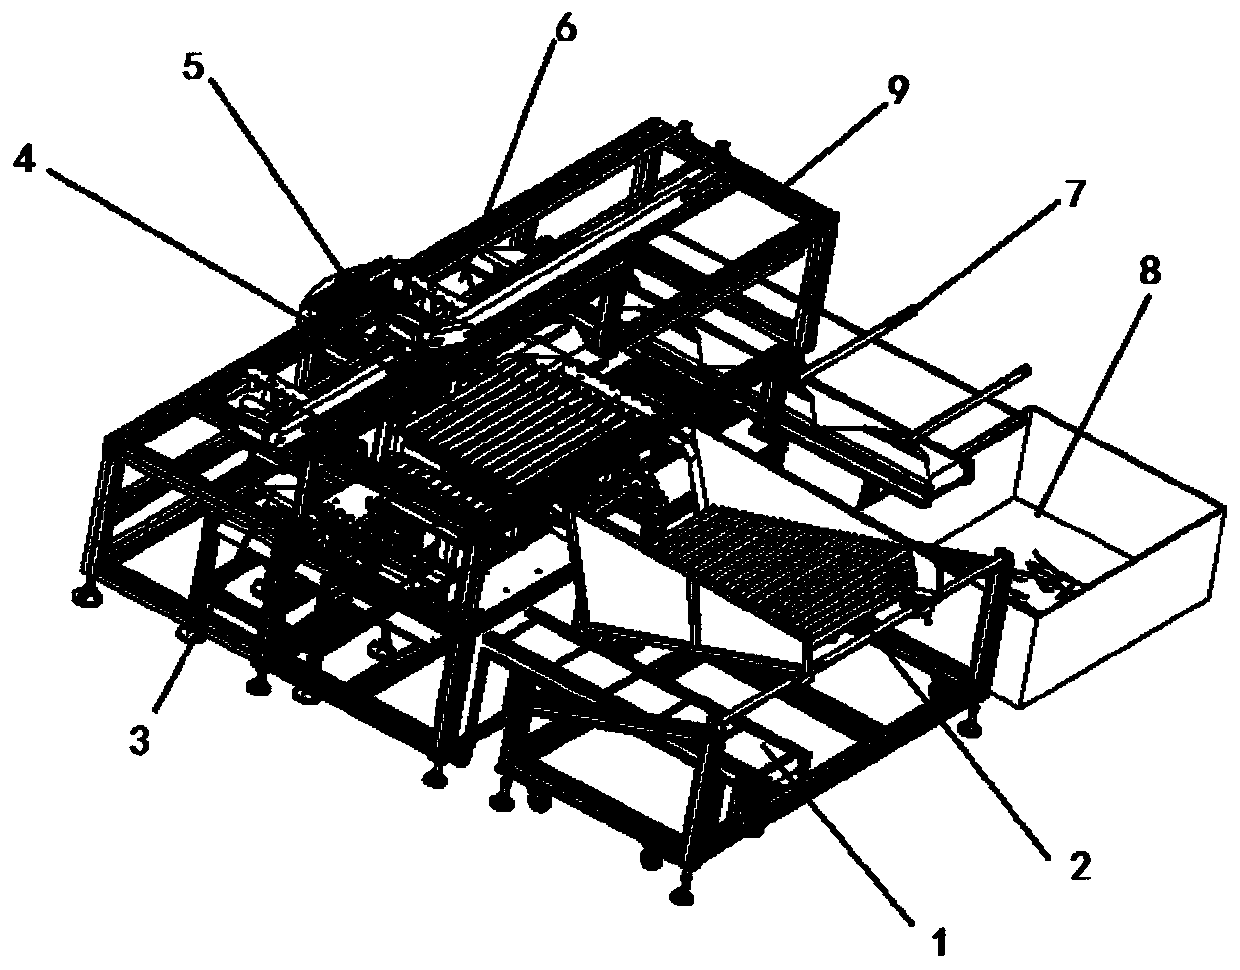 A broom automatic assembly device